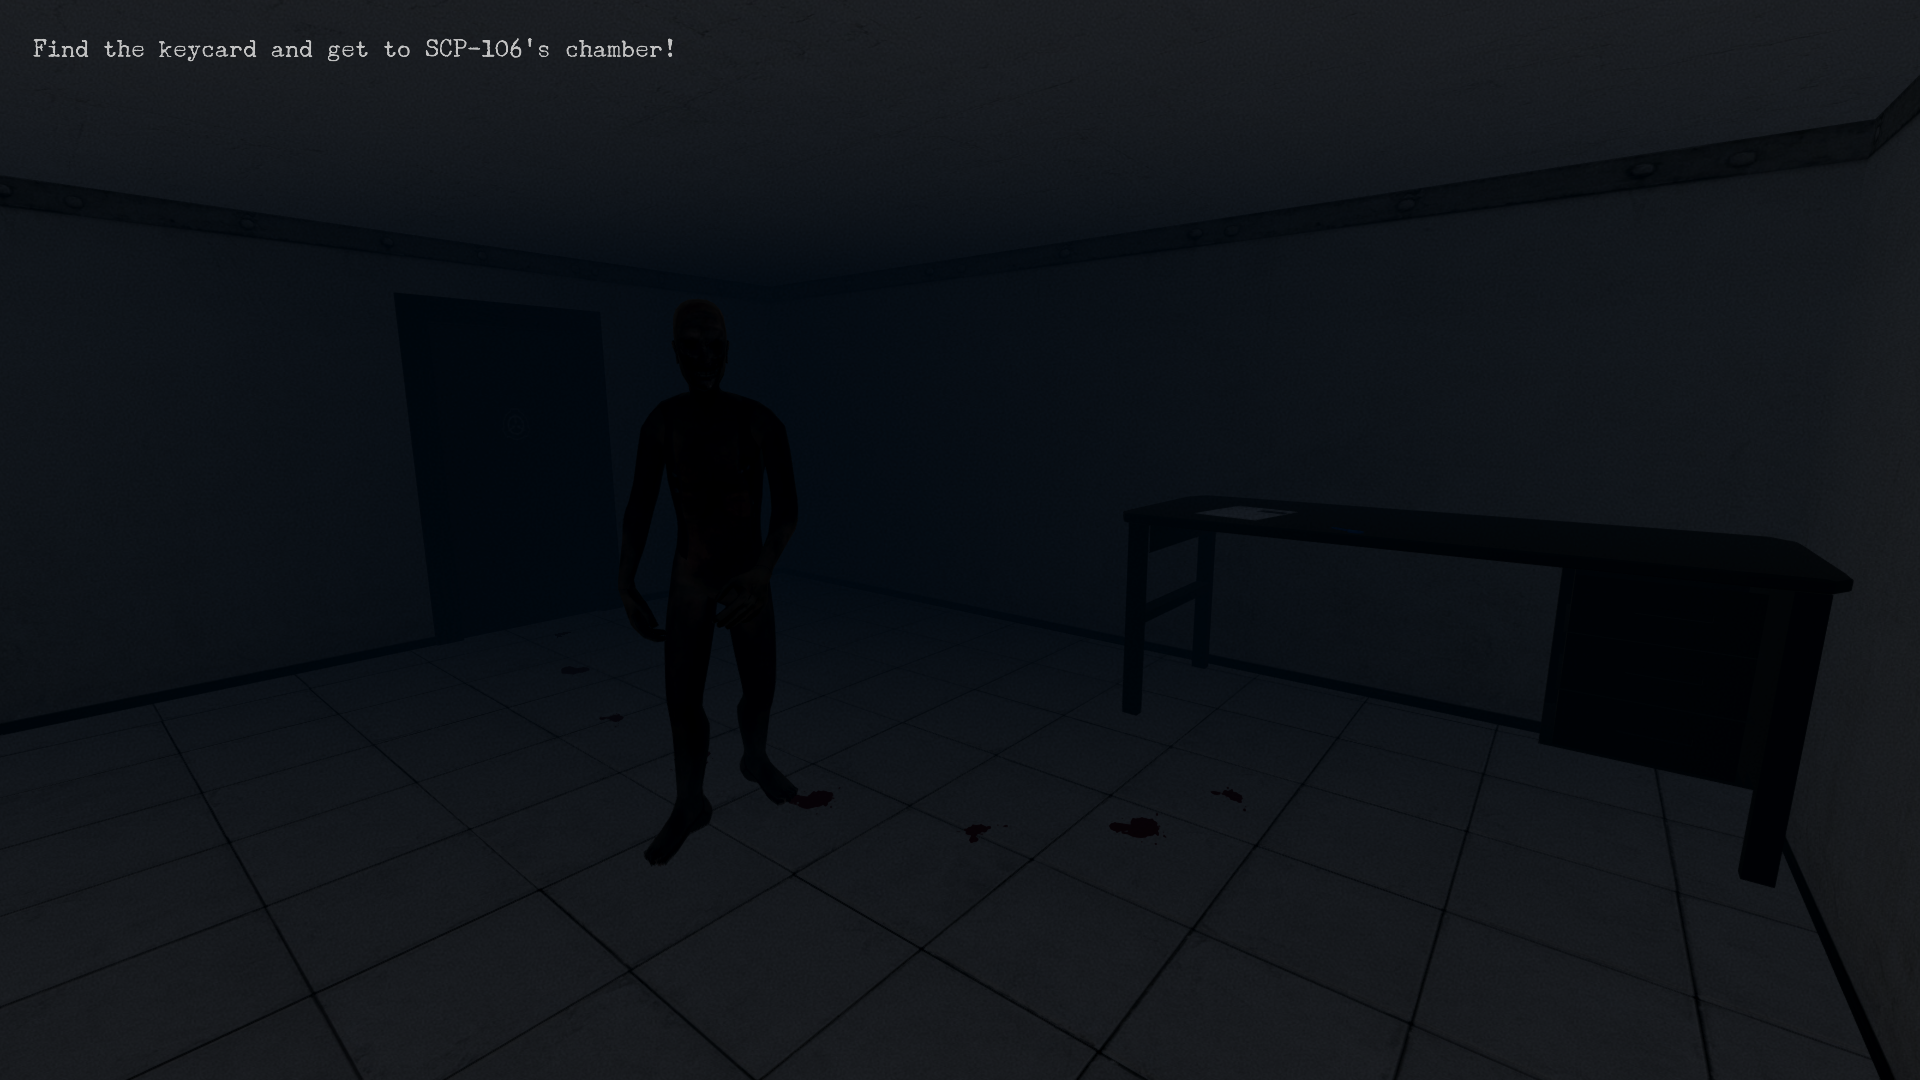 SCP 106 Simulator by IndiMan22 - Game Jolt